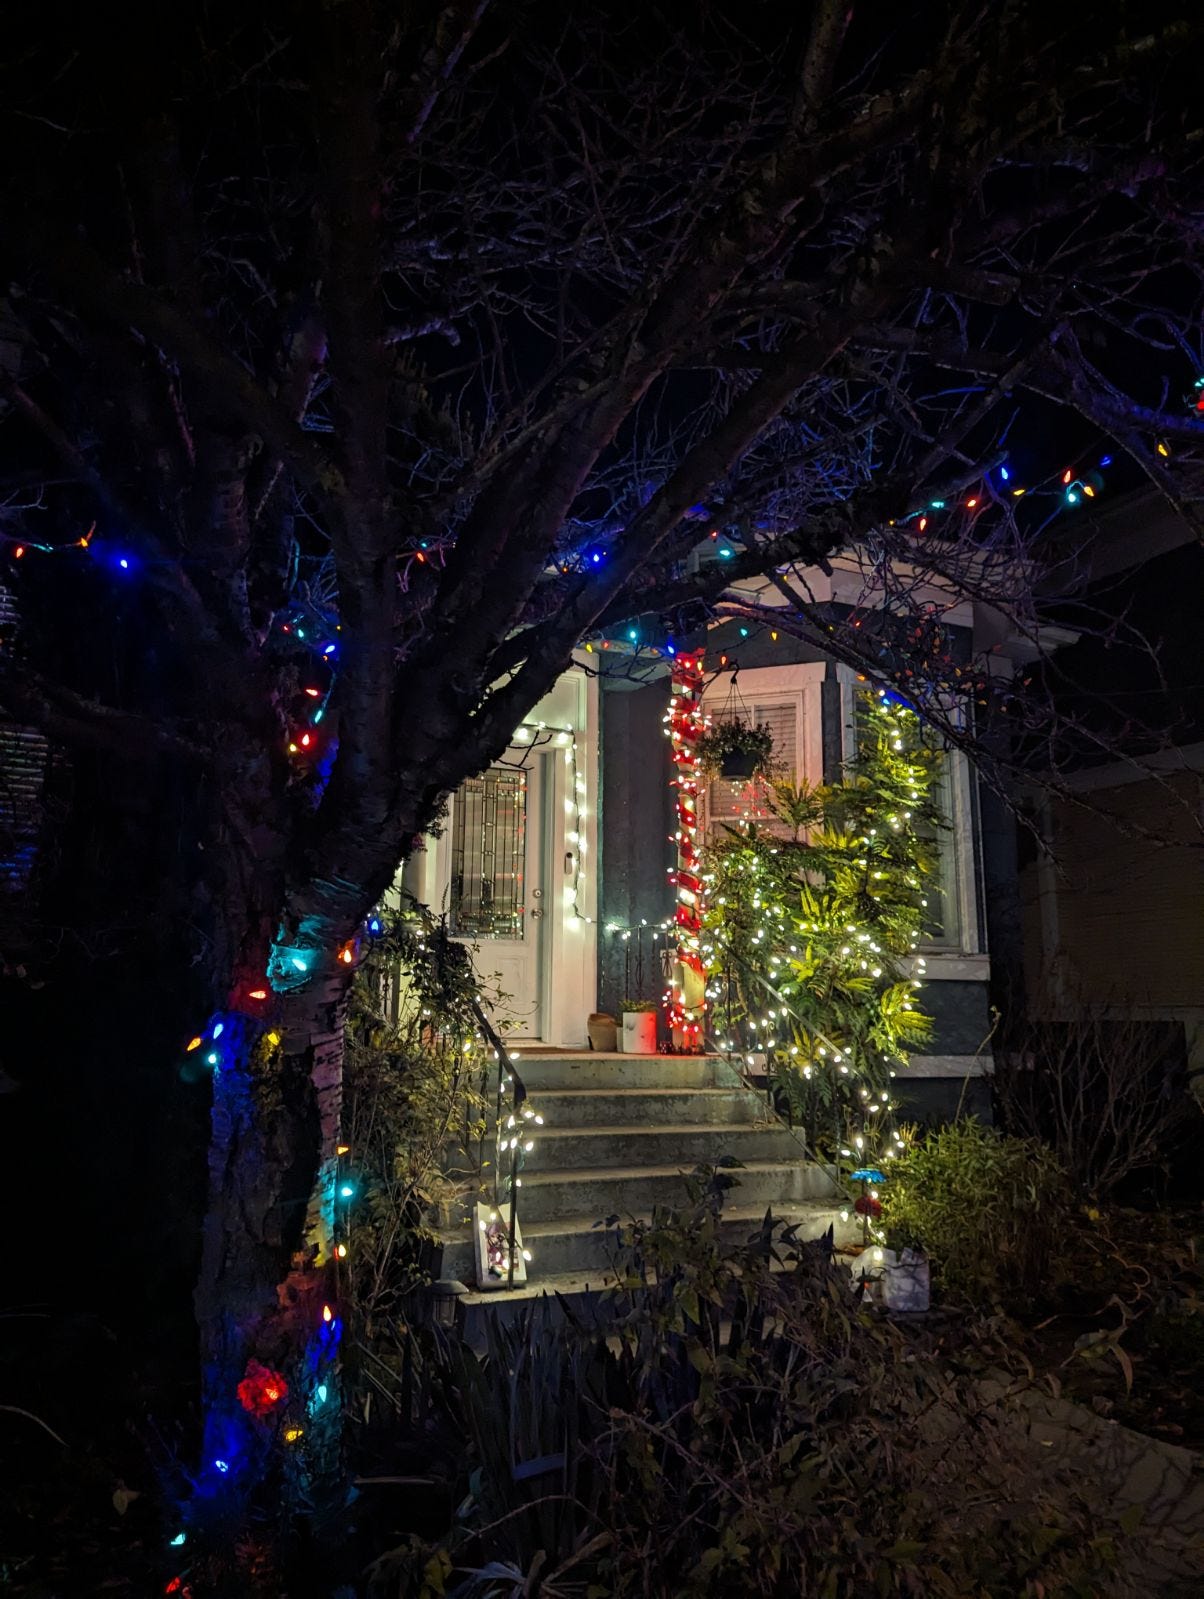 The front of a house with Christmas lights